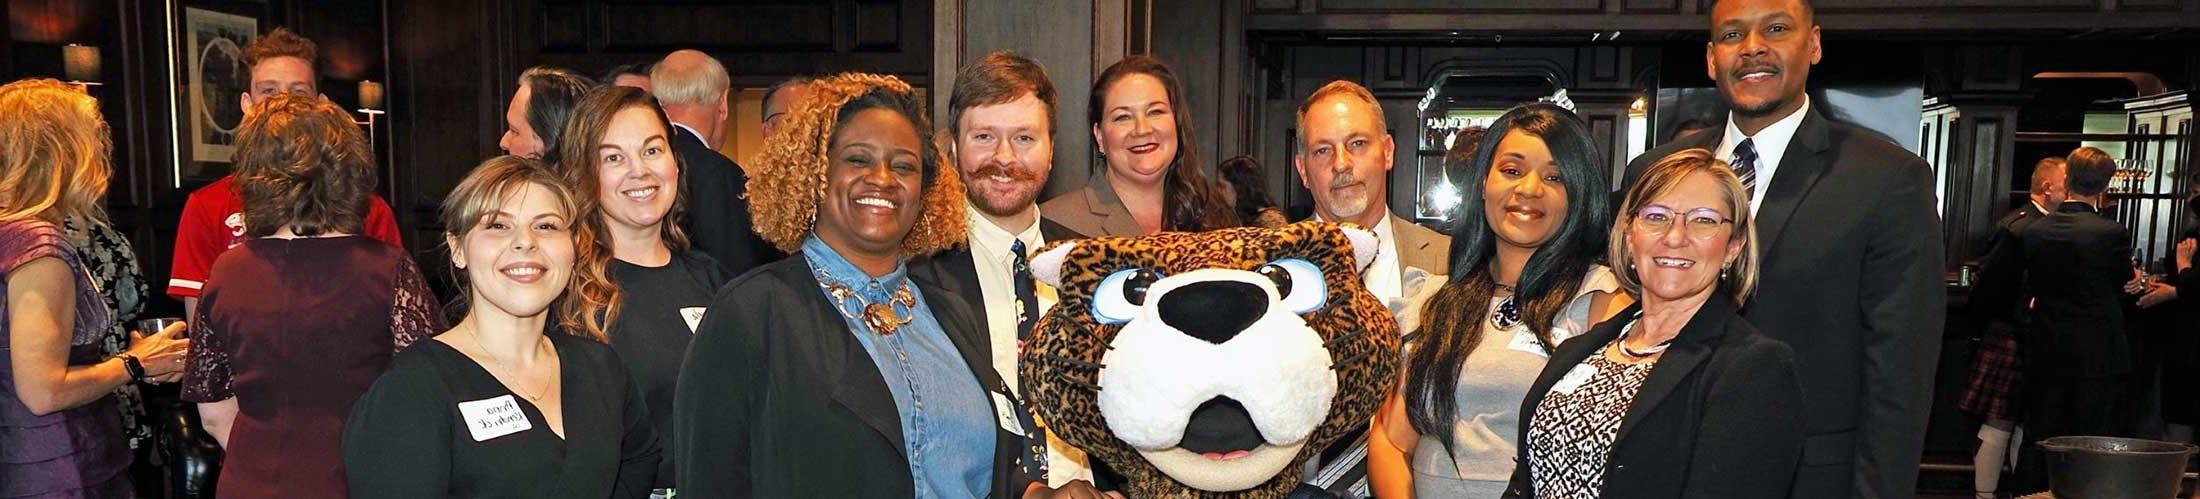 Group image from spring celebration with Mr. Paw